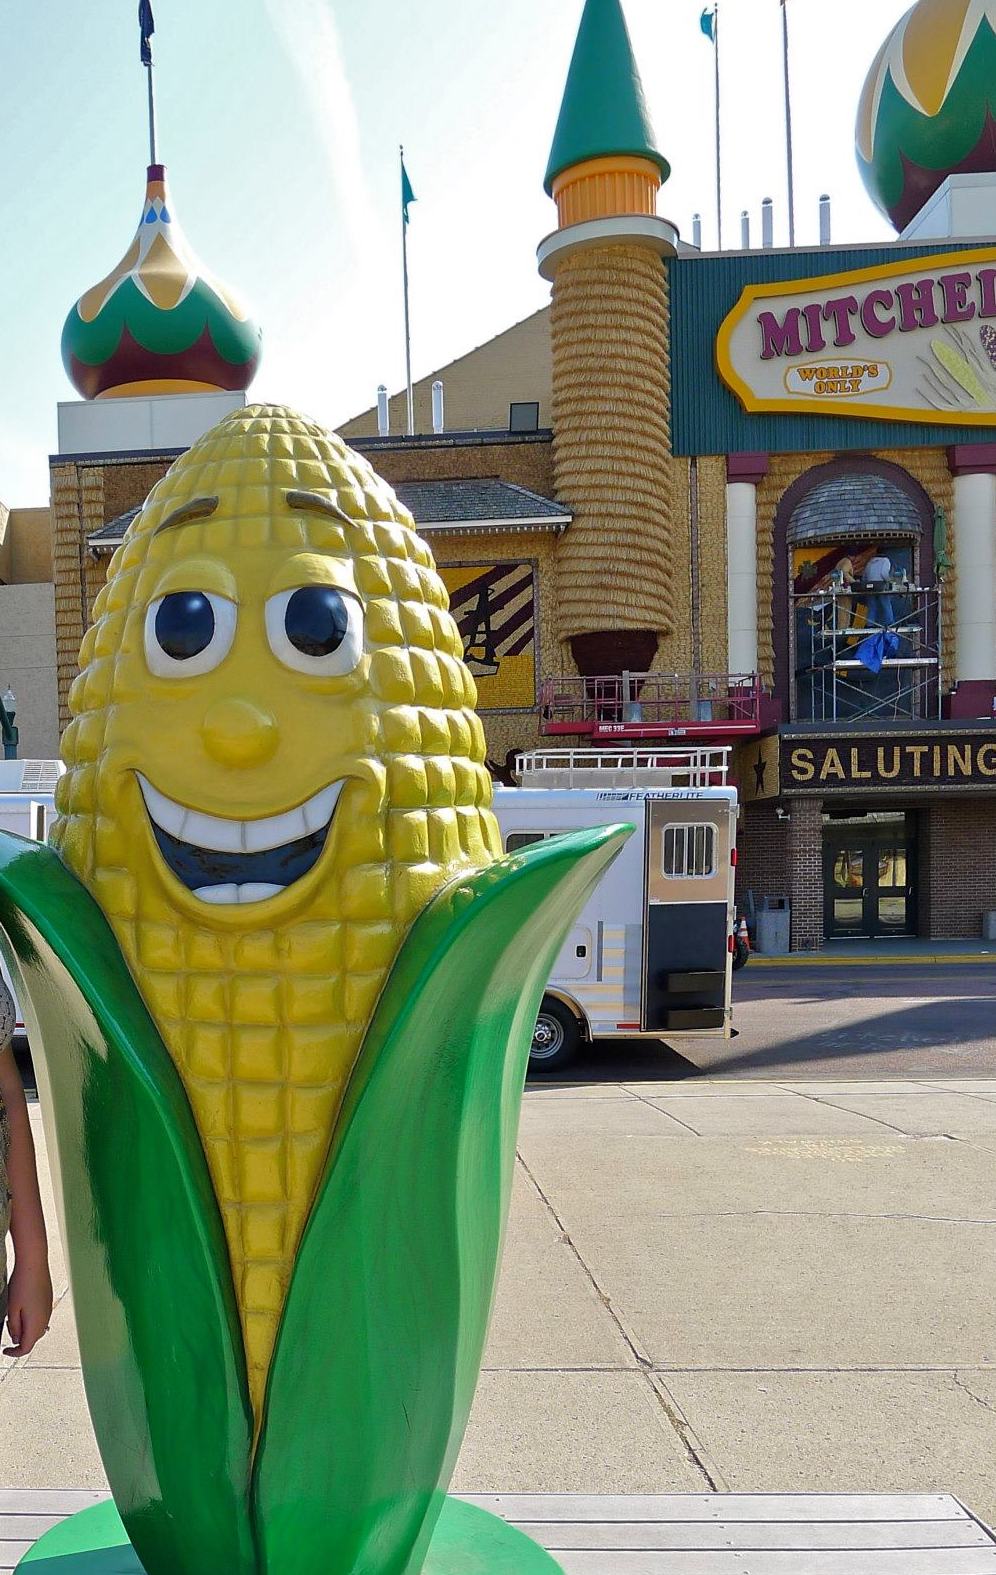 corn palace only 5 minutes away!